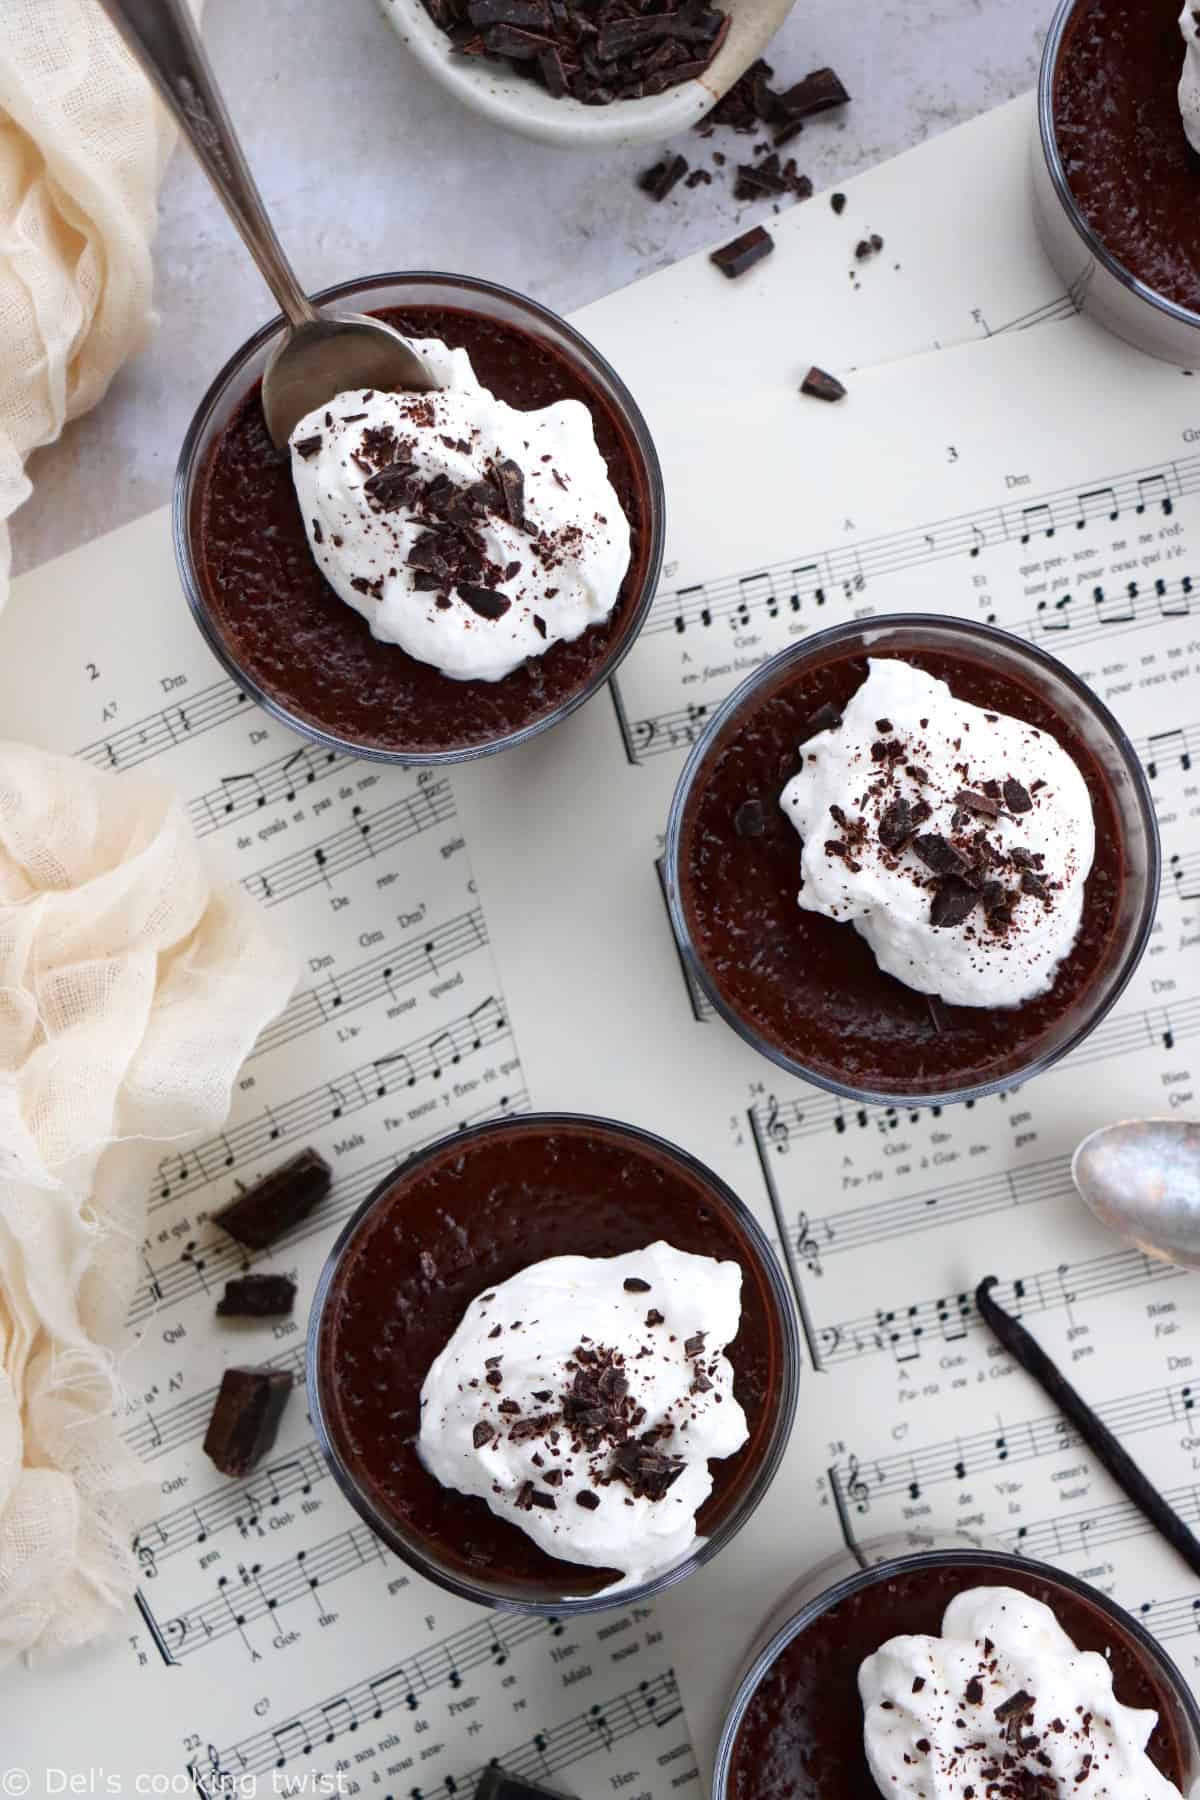 Chocolate pots de crème are rich and creamy French chocolate custards with intense chocolate flavors.